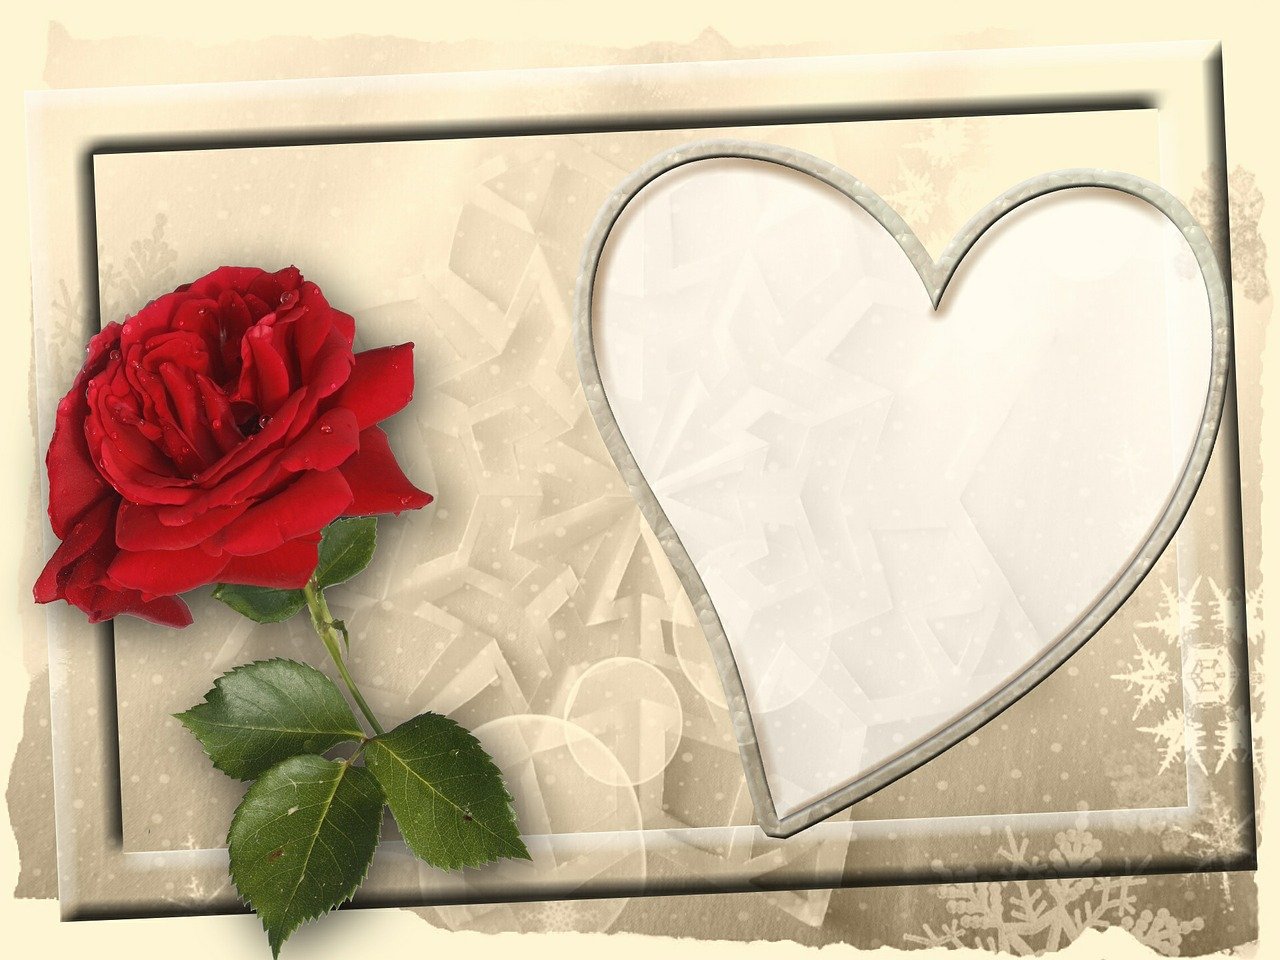 a red rose sitting next to a heart shaped frame, a picture, textured parchment background, mirror and glass surfaces, background image, 3d collage